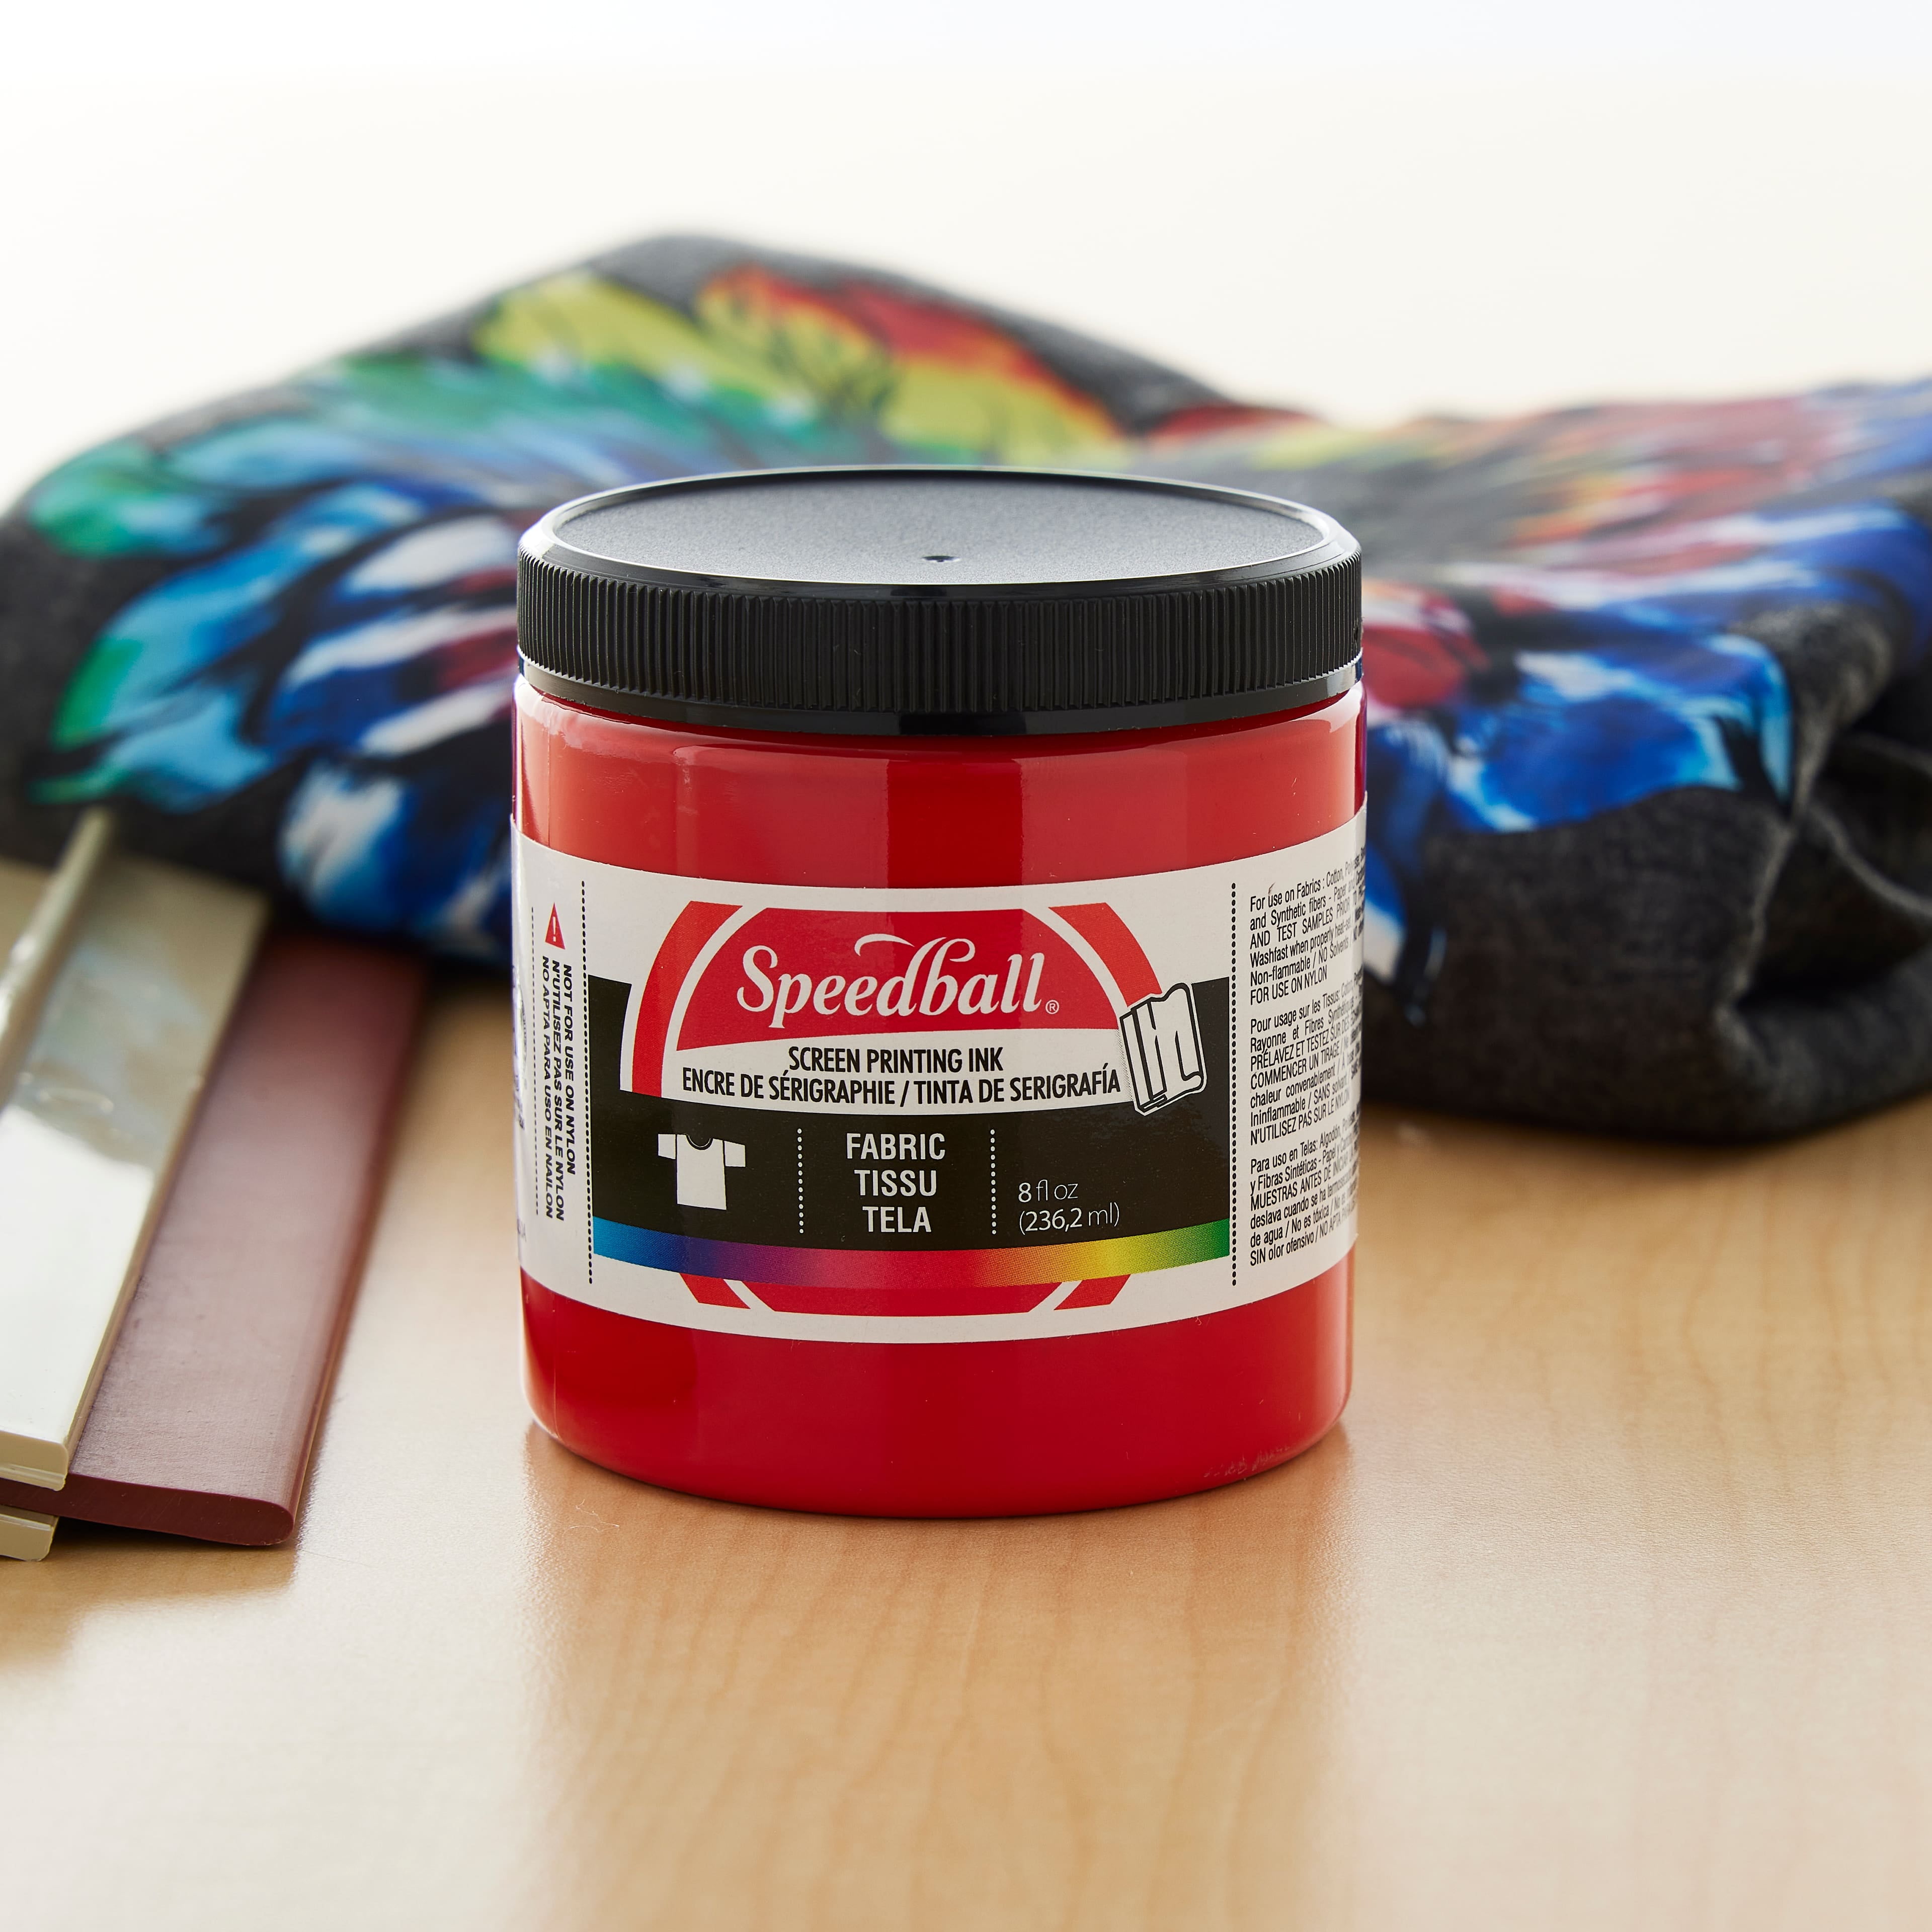 Speedball Fabric Block Printing Ink Review: Long-Term Test